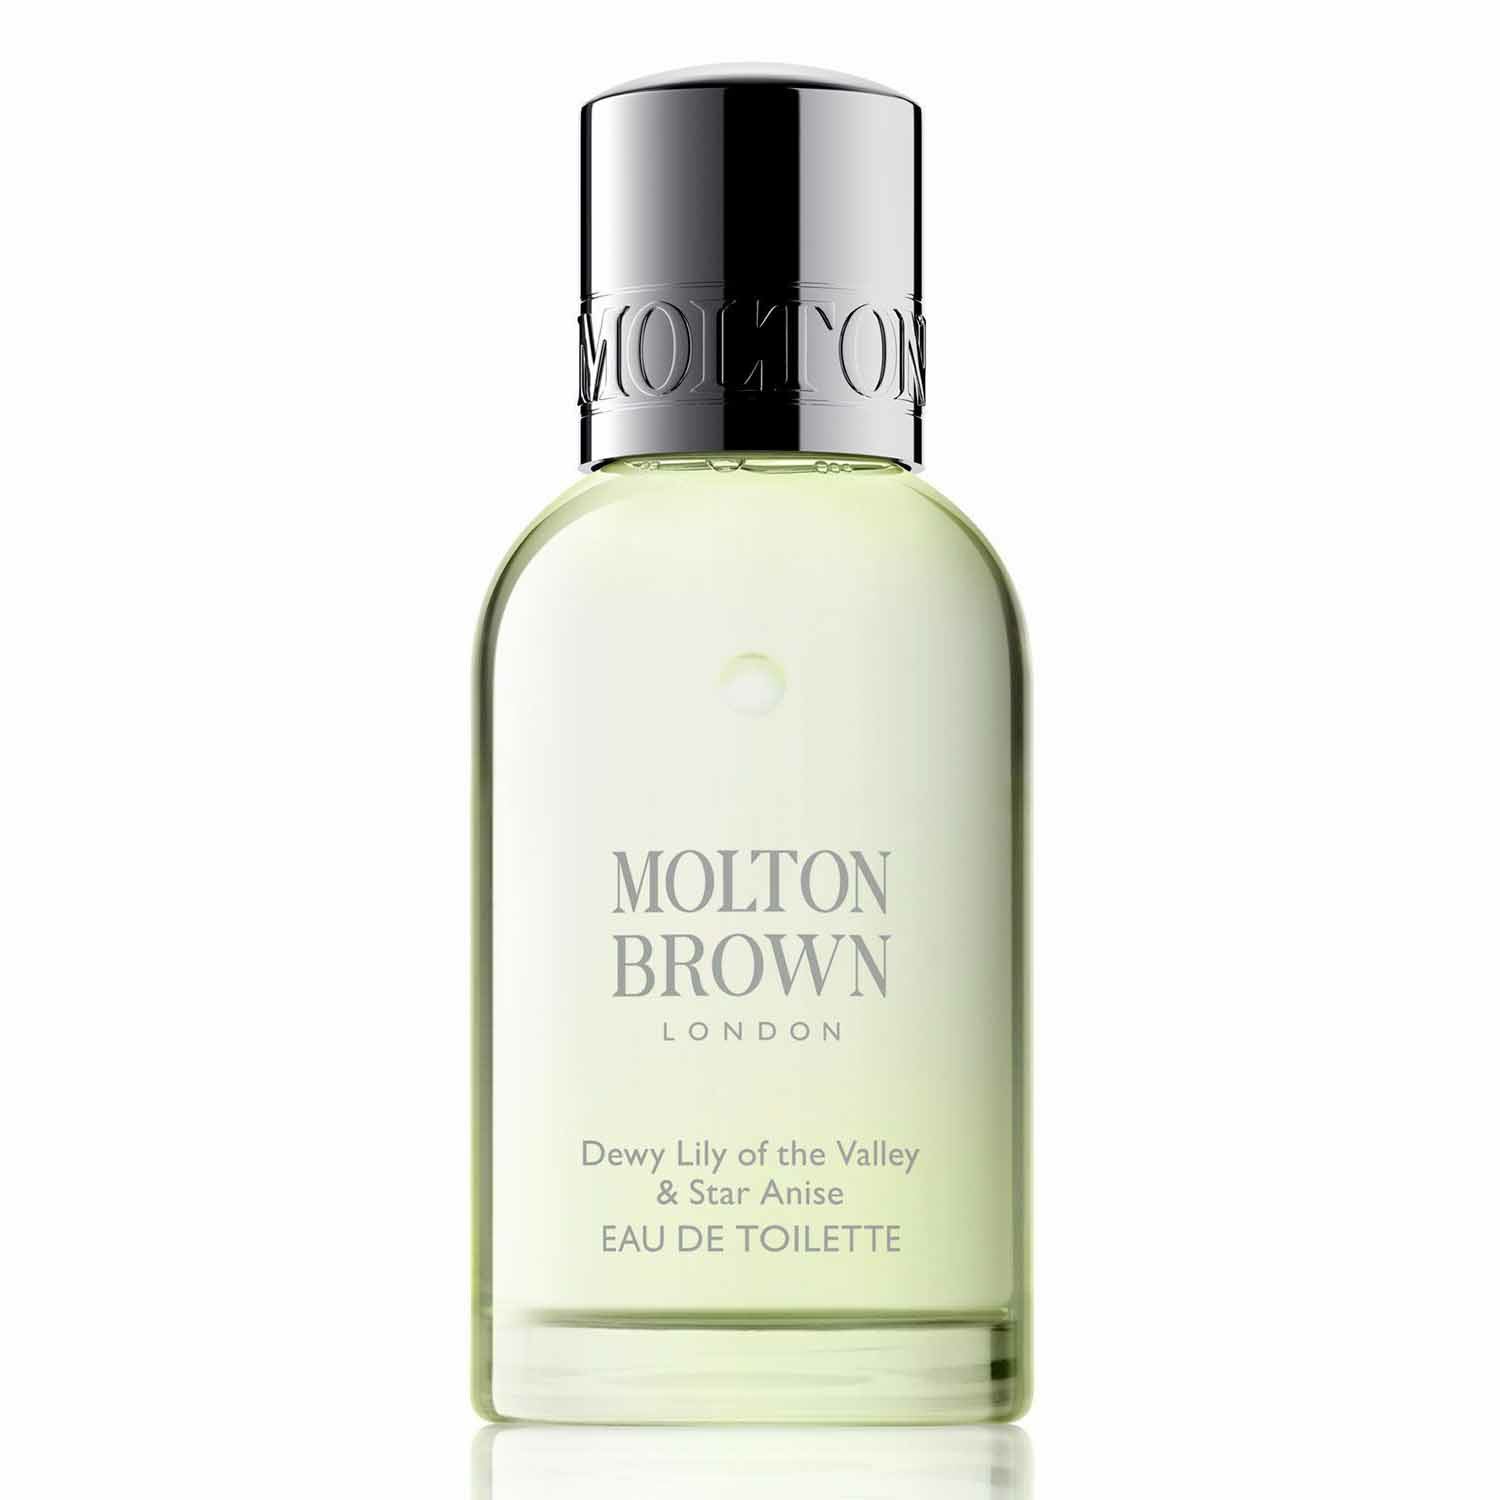 Molton Brown Dewy Lily Of The Valley & Star Anise Eau De Toi